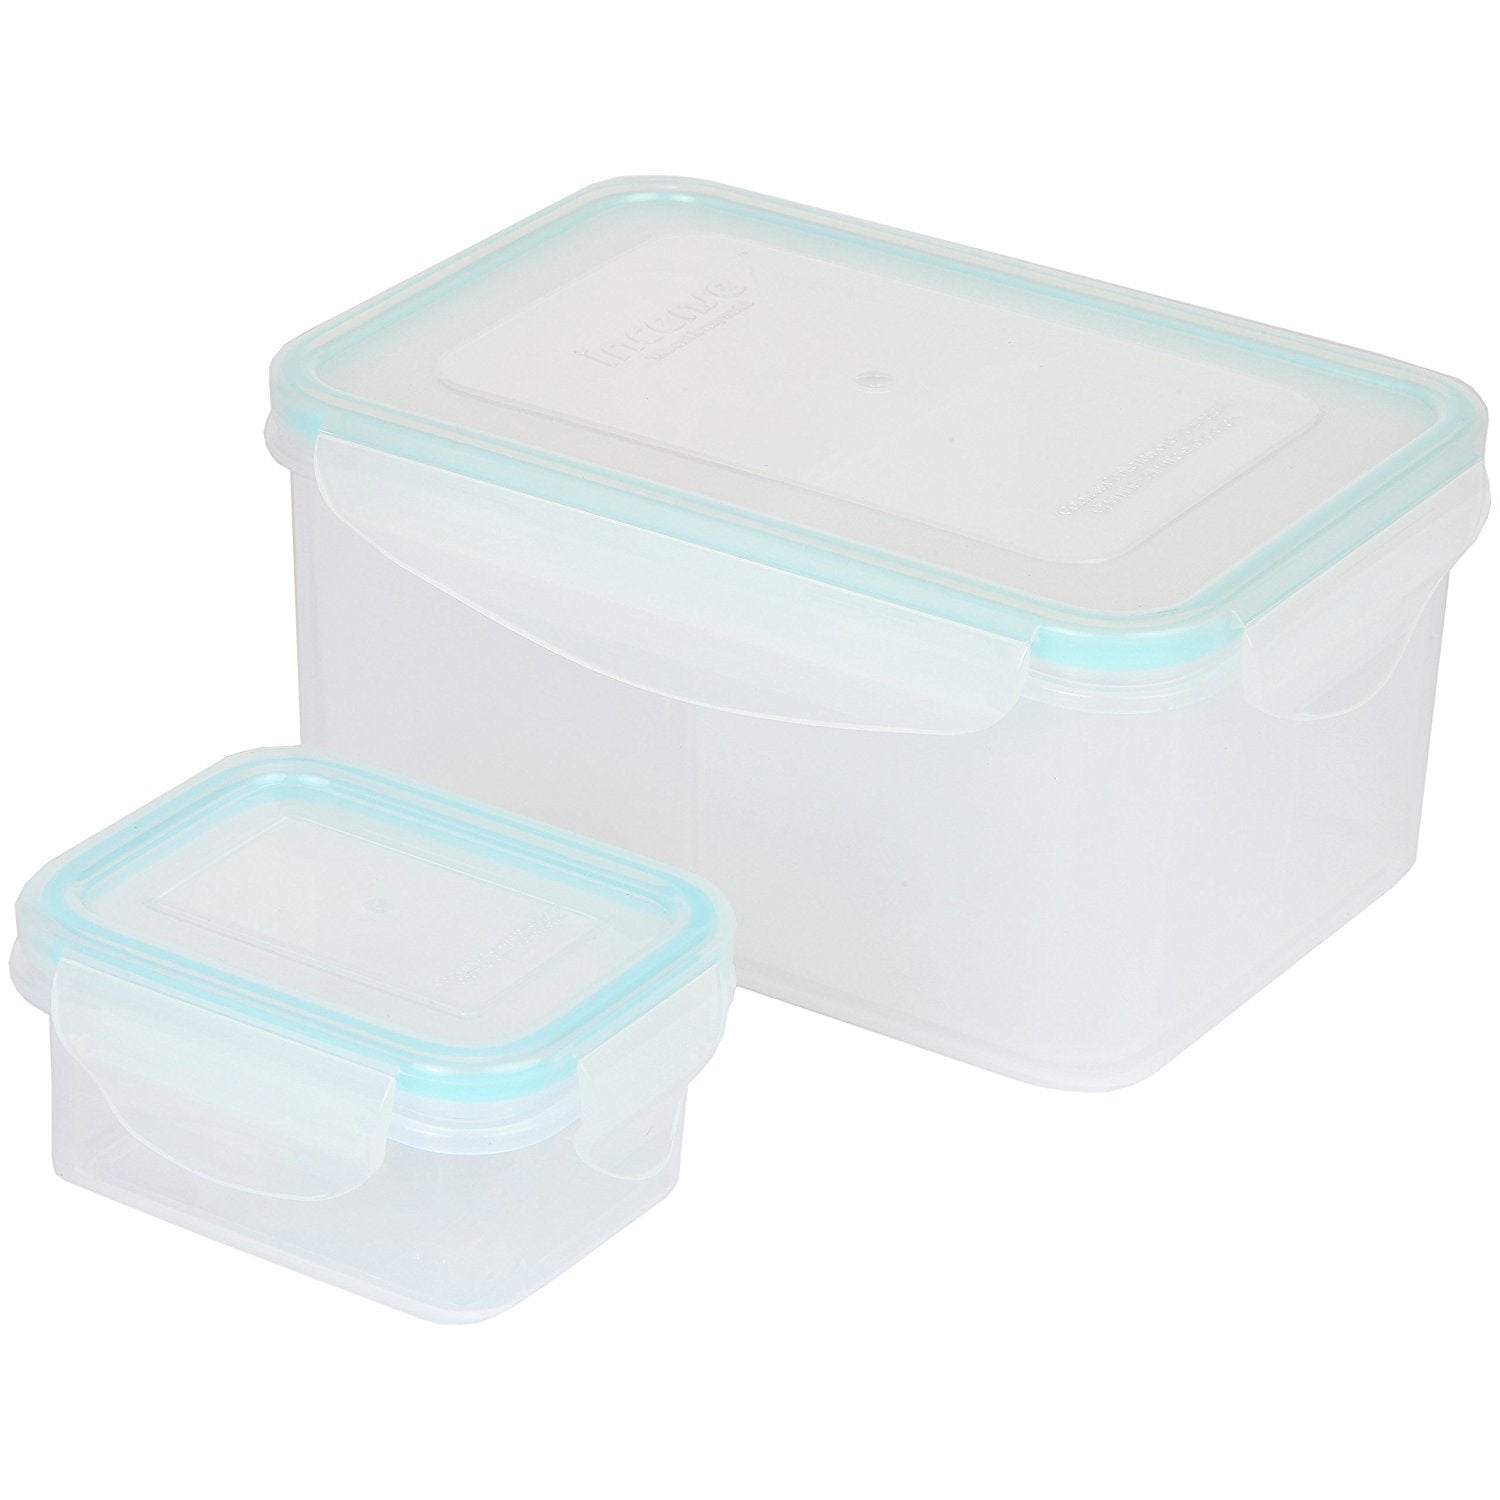 4 Pack Bento Lunch Box,3-Compartment Meal Prep Containers,Lunch